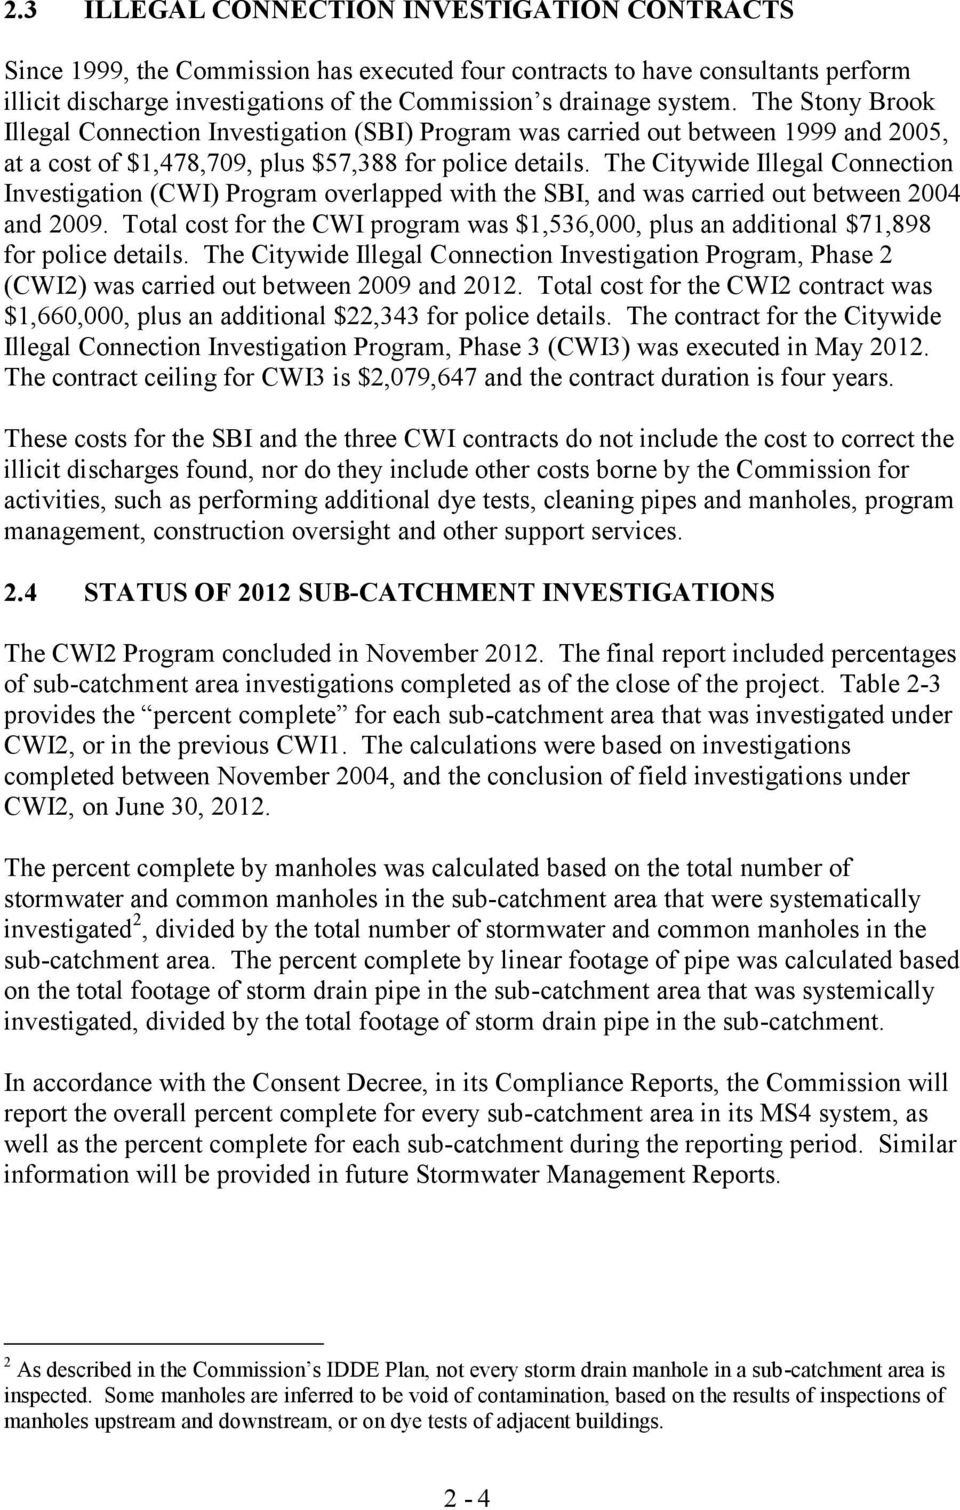 The Citywide Illegal Connection Investigation (CWI) Program overlapped with the SBI, and was carried out between 2004 and 2009.